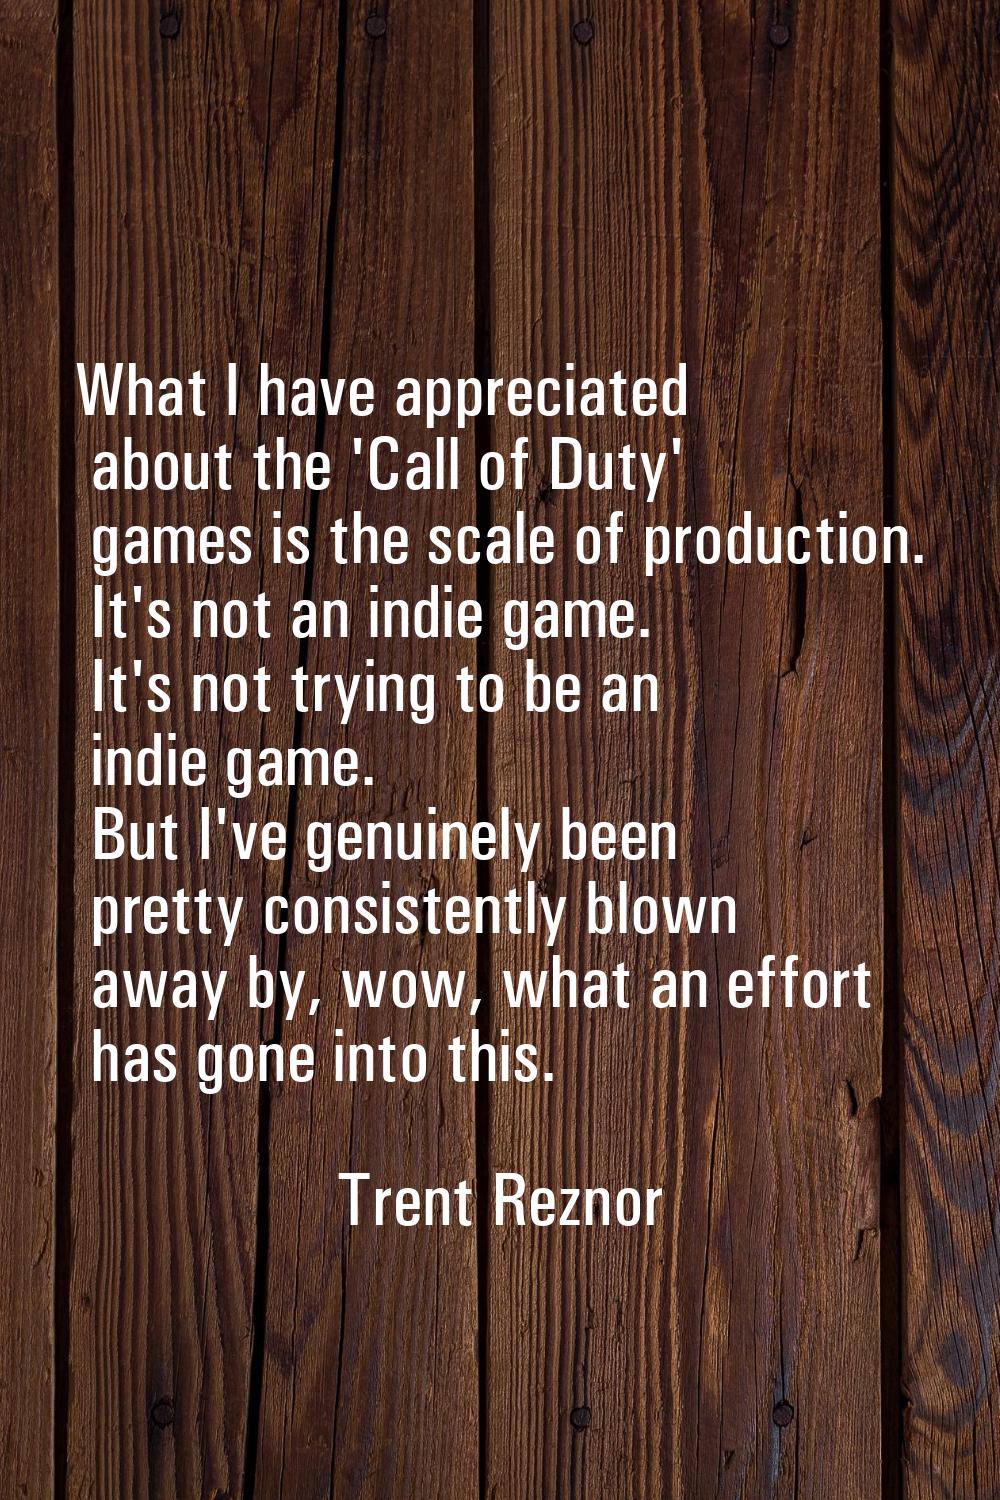 What I have appreciated about the 'Call of Duty' games is the scale of production. It's not an indi